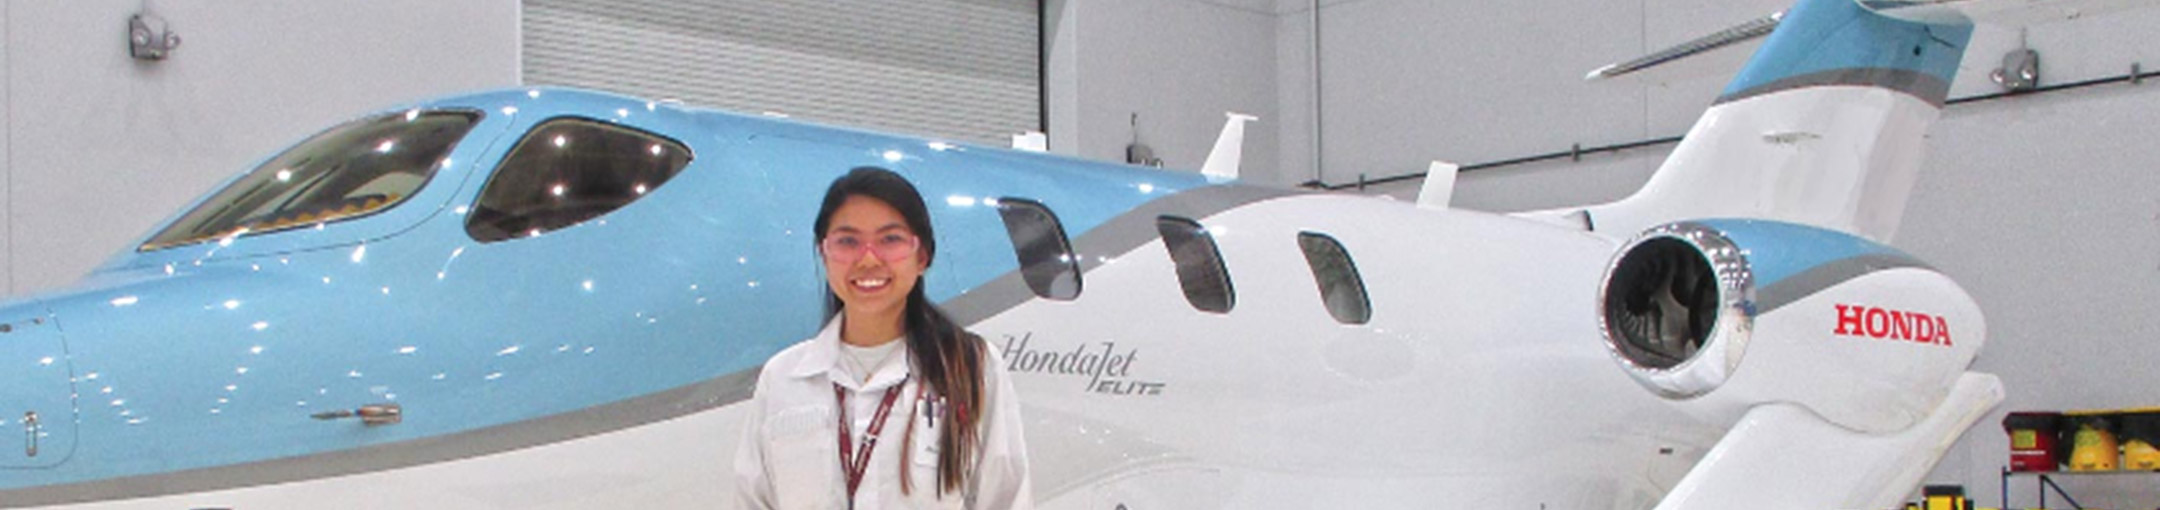 A student stands in front of an airplane with the Honda logo on it.